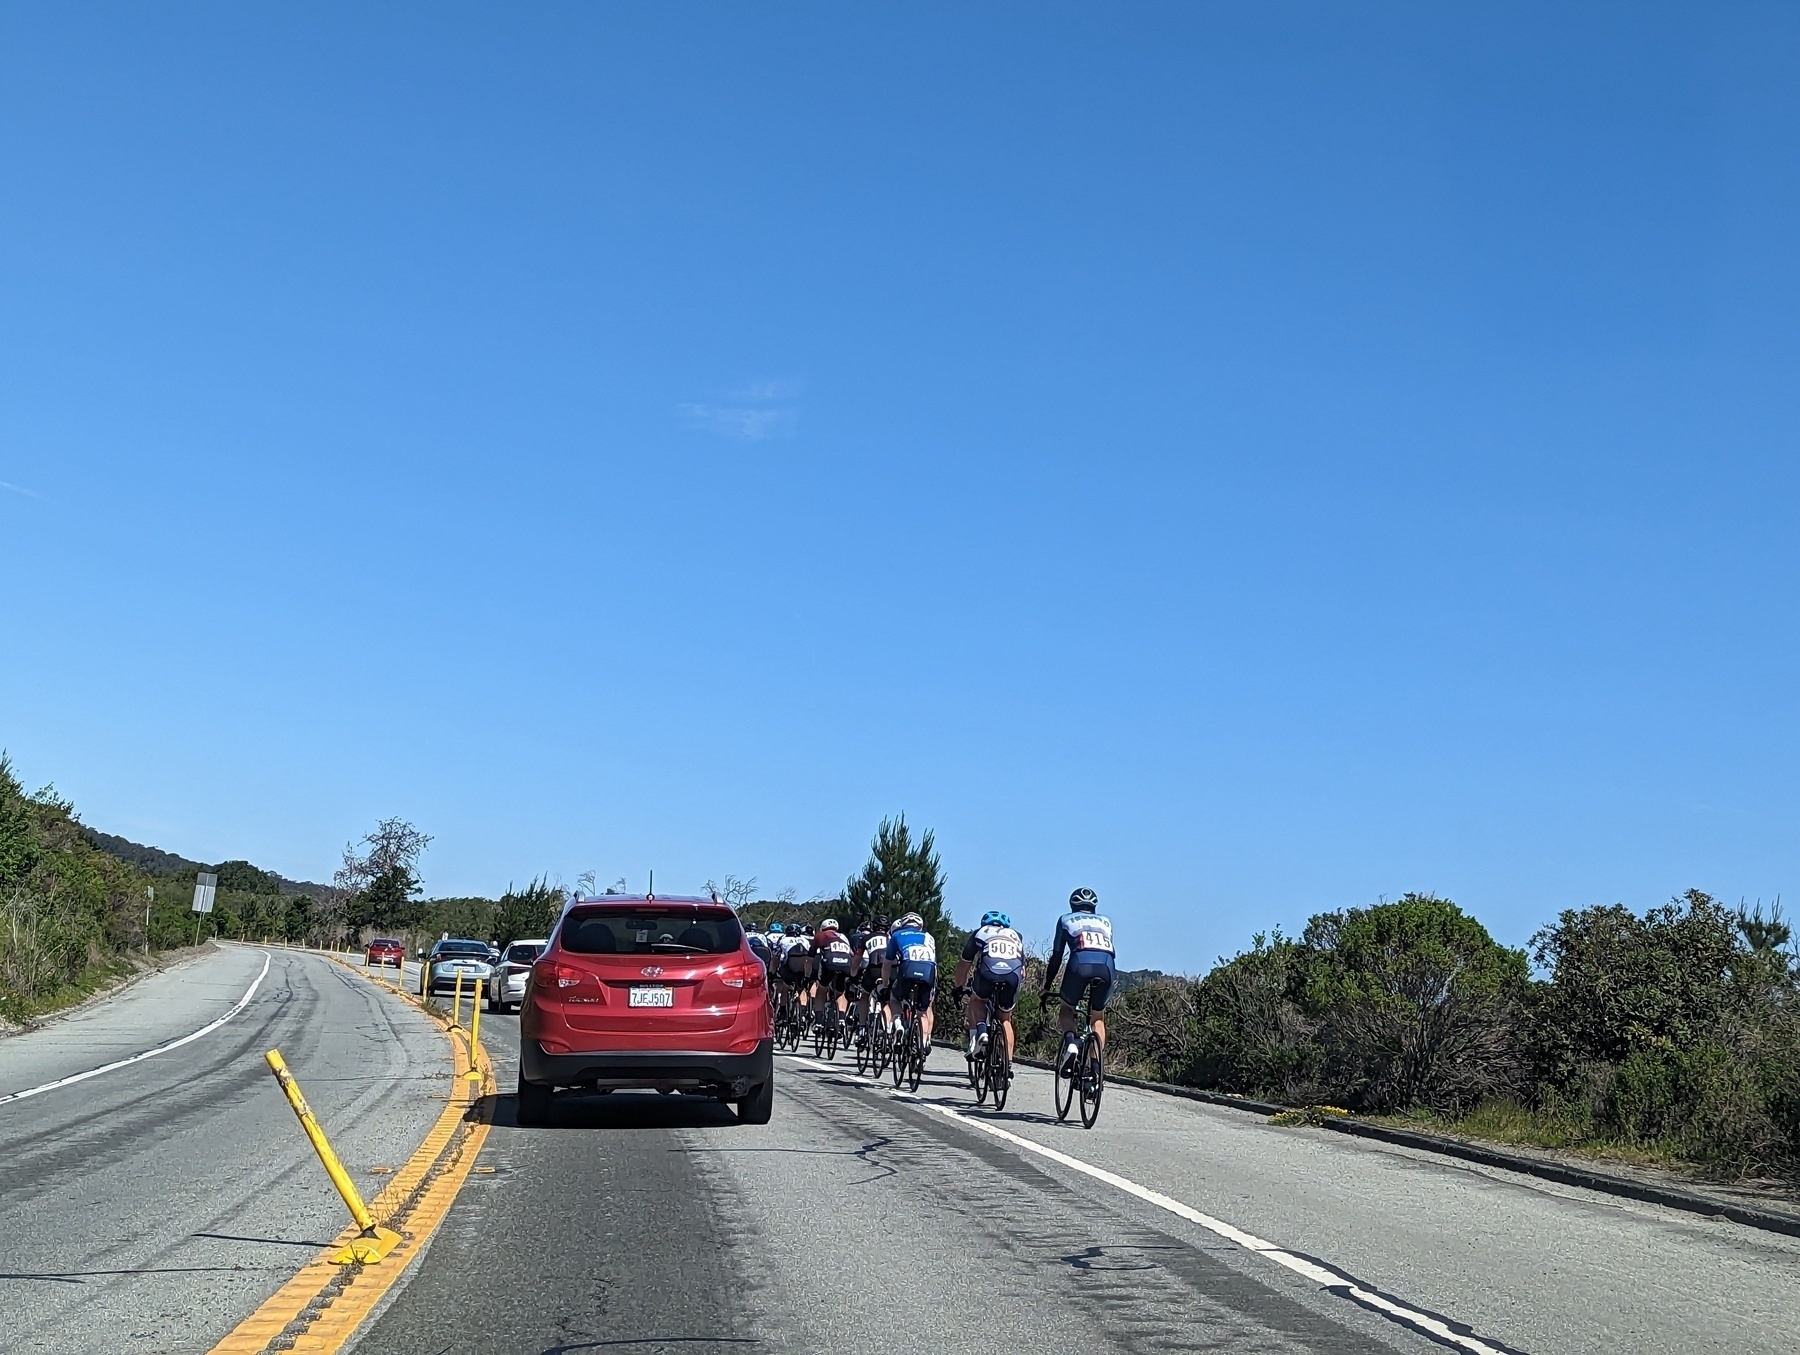 A peloton of road bicyclists rides in the bike lane alongside light traffic in  northbound San Pablo Dam Road west of the the San Pablo Reservoir under blue skies Saturday, April 29, 2023 in unincorporated Contra Costa County